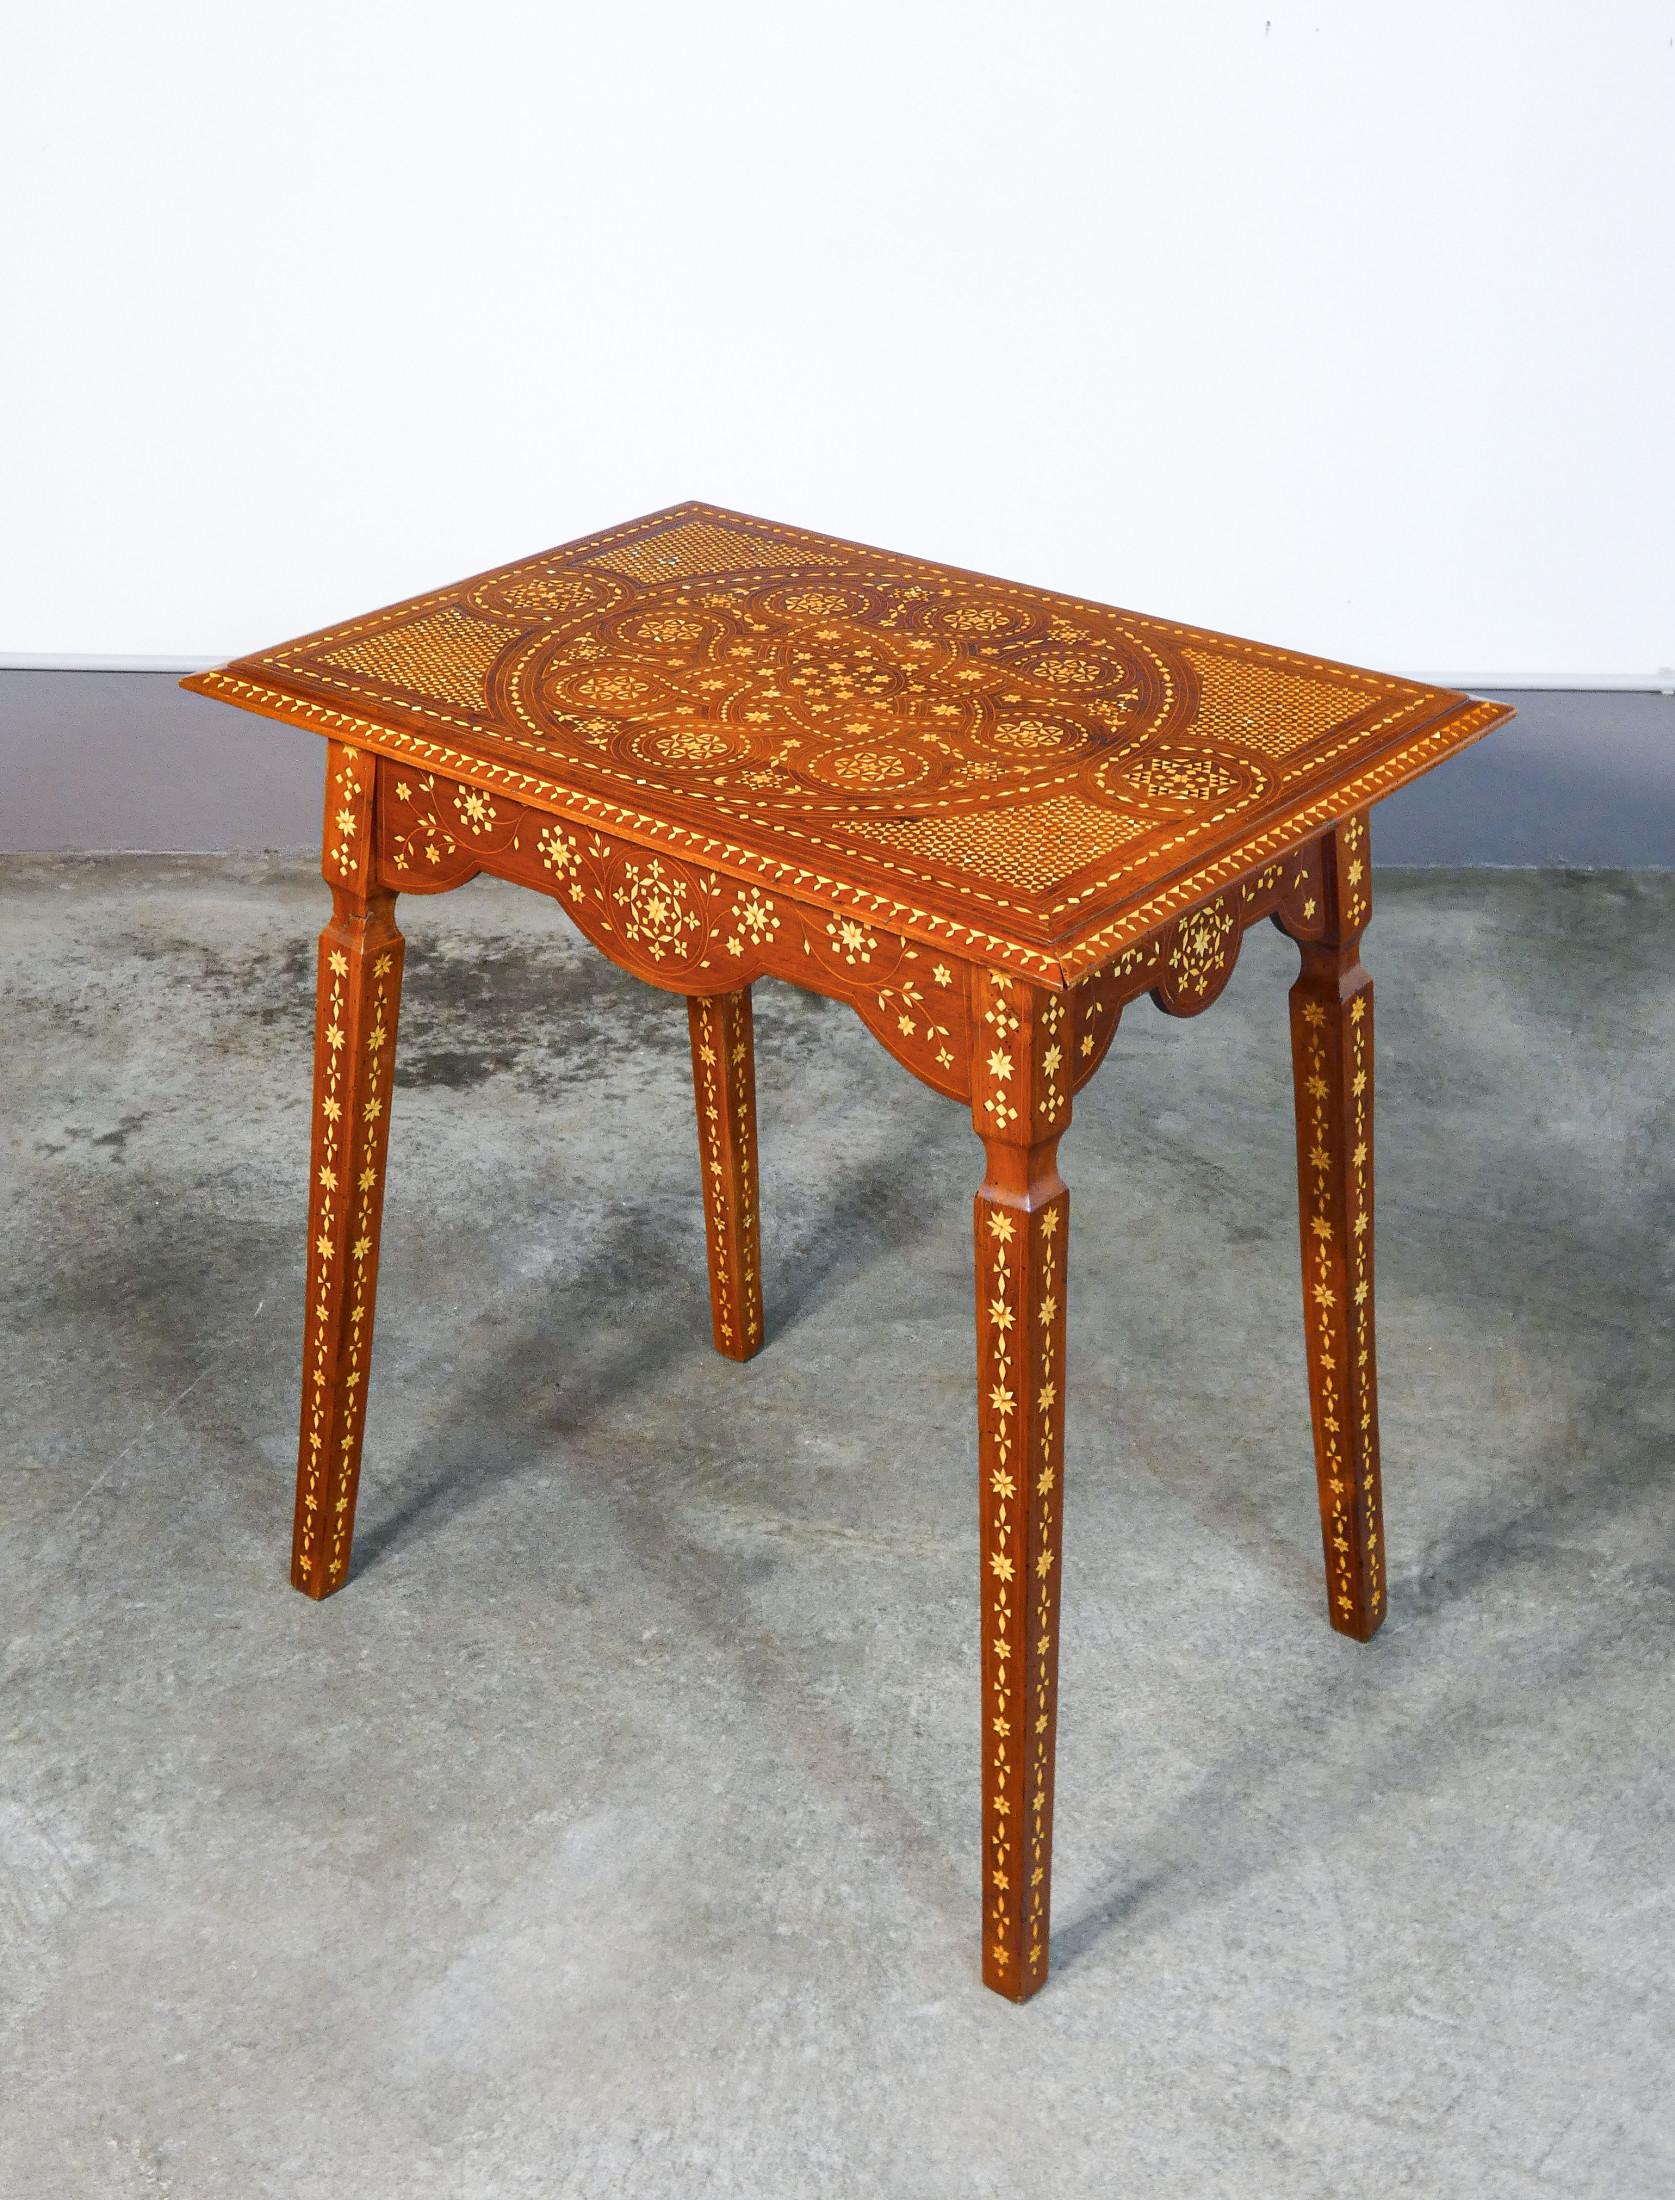 Wooden coffee table
carthusian inlaid,
adriano Brambilla style.
Italy, late 19th century,
Early twentieth century

ORIGIN
Italy

PERIOD
Late 19th century,
Early twentieth century

MATERIALS
Wood Marquetry

DIMENSIONS
Height: 81 cm
Width: 76